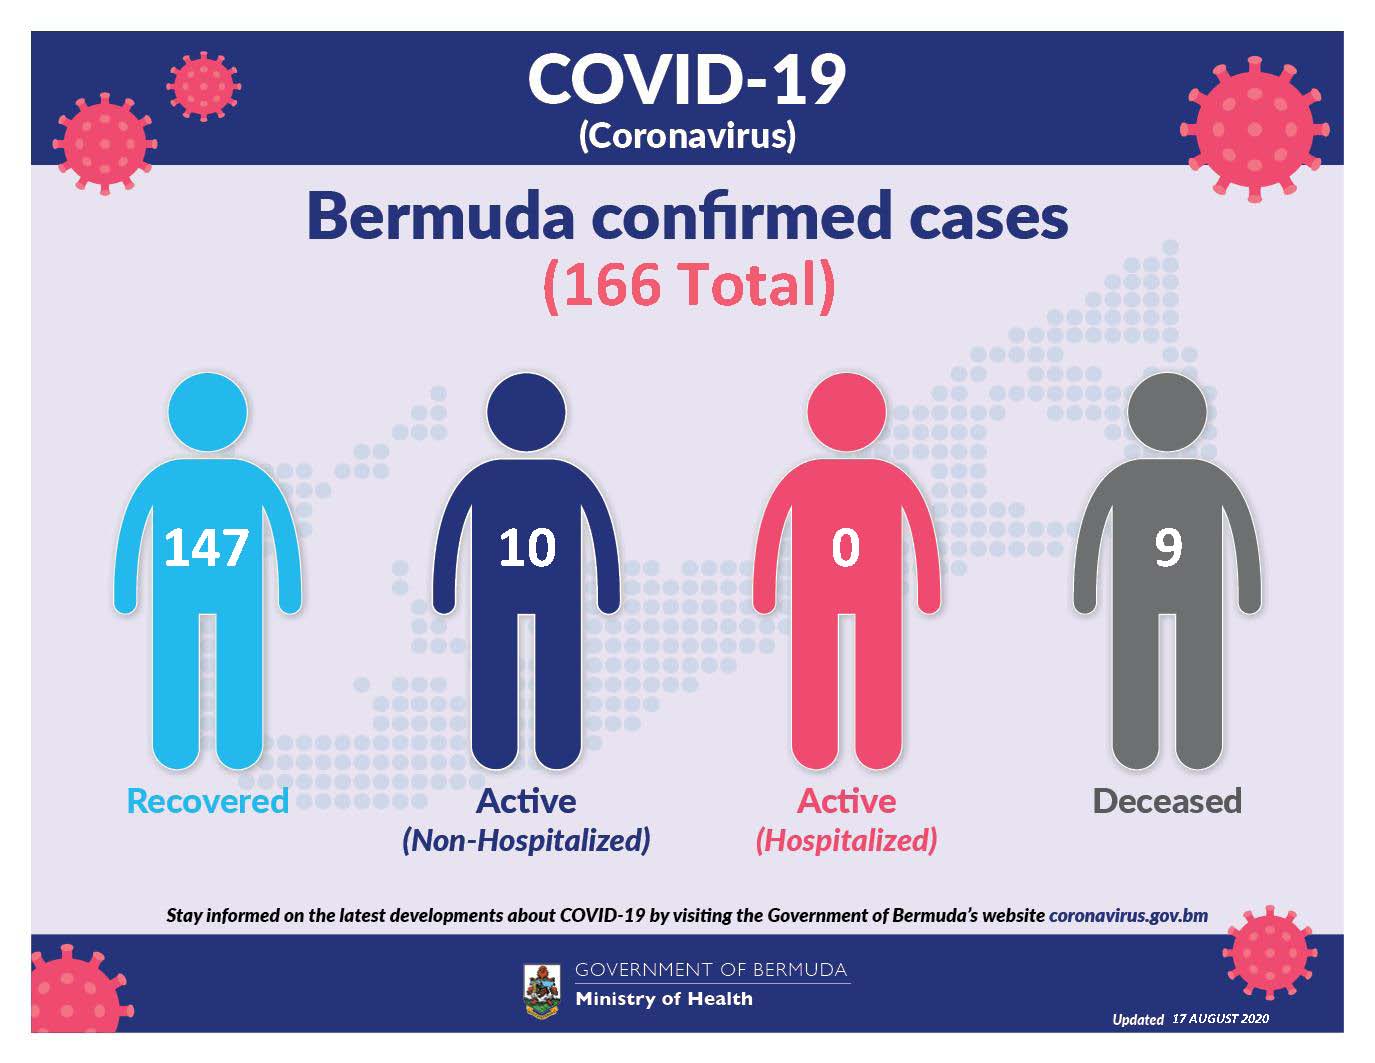 4 new COVID-19 cases reported in Bermuda, 17 August